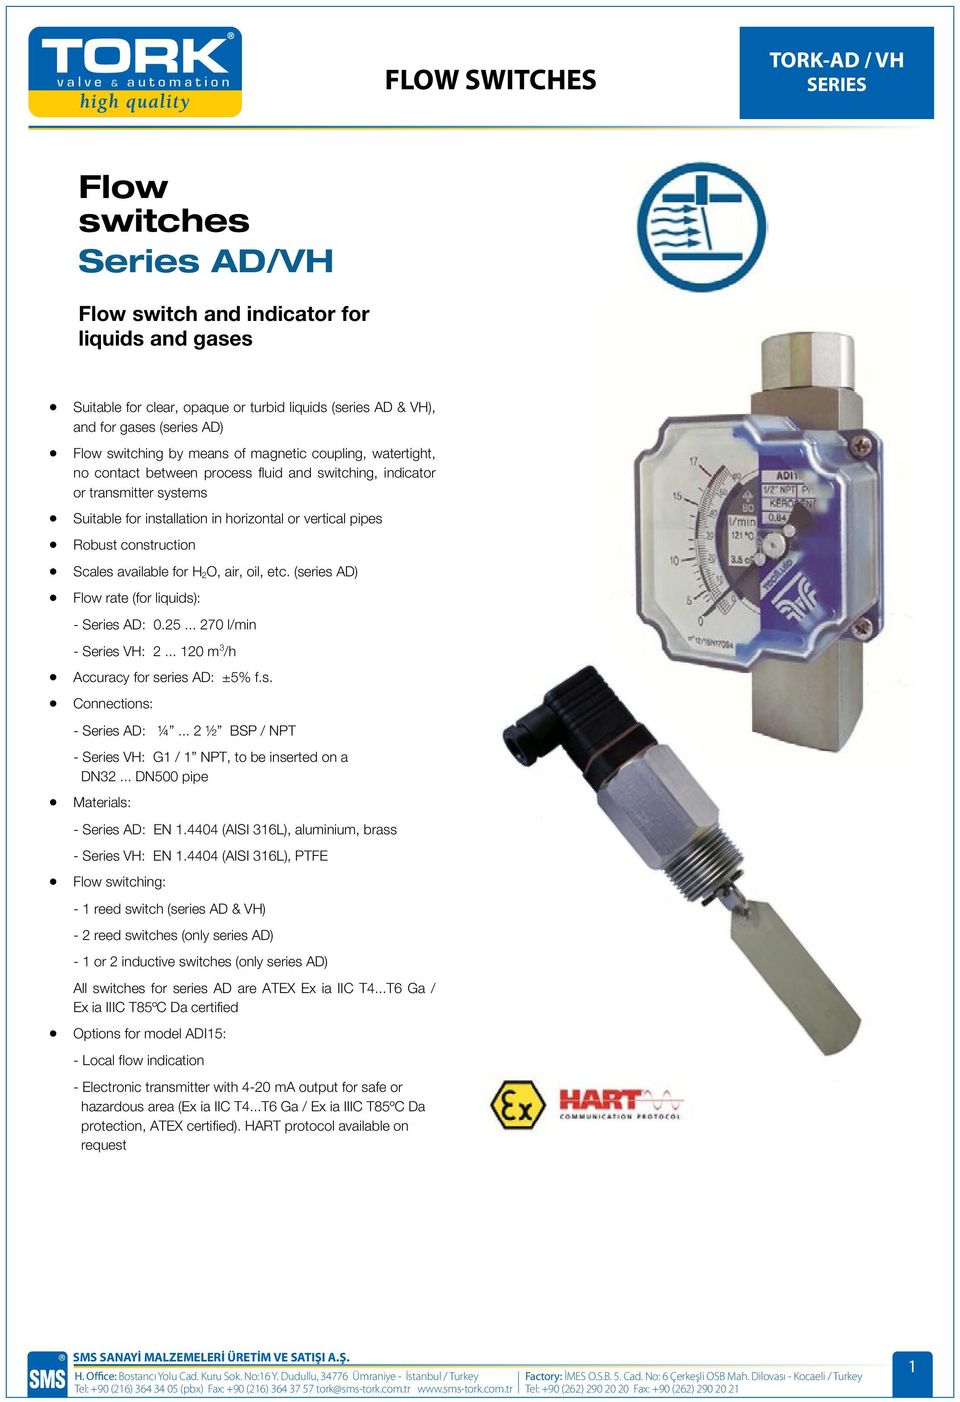 air, oil, etc. (series AD) Flow rate (for liquids): - Series AD: 0.25... 270 l/min - Series VH: 2... 120 m 3 /h Accuracy for series AD: ±5% f.s. Connections: - Series AD: ¼.